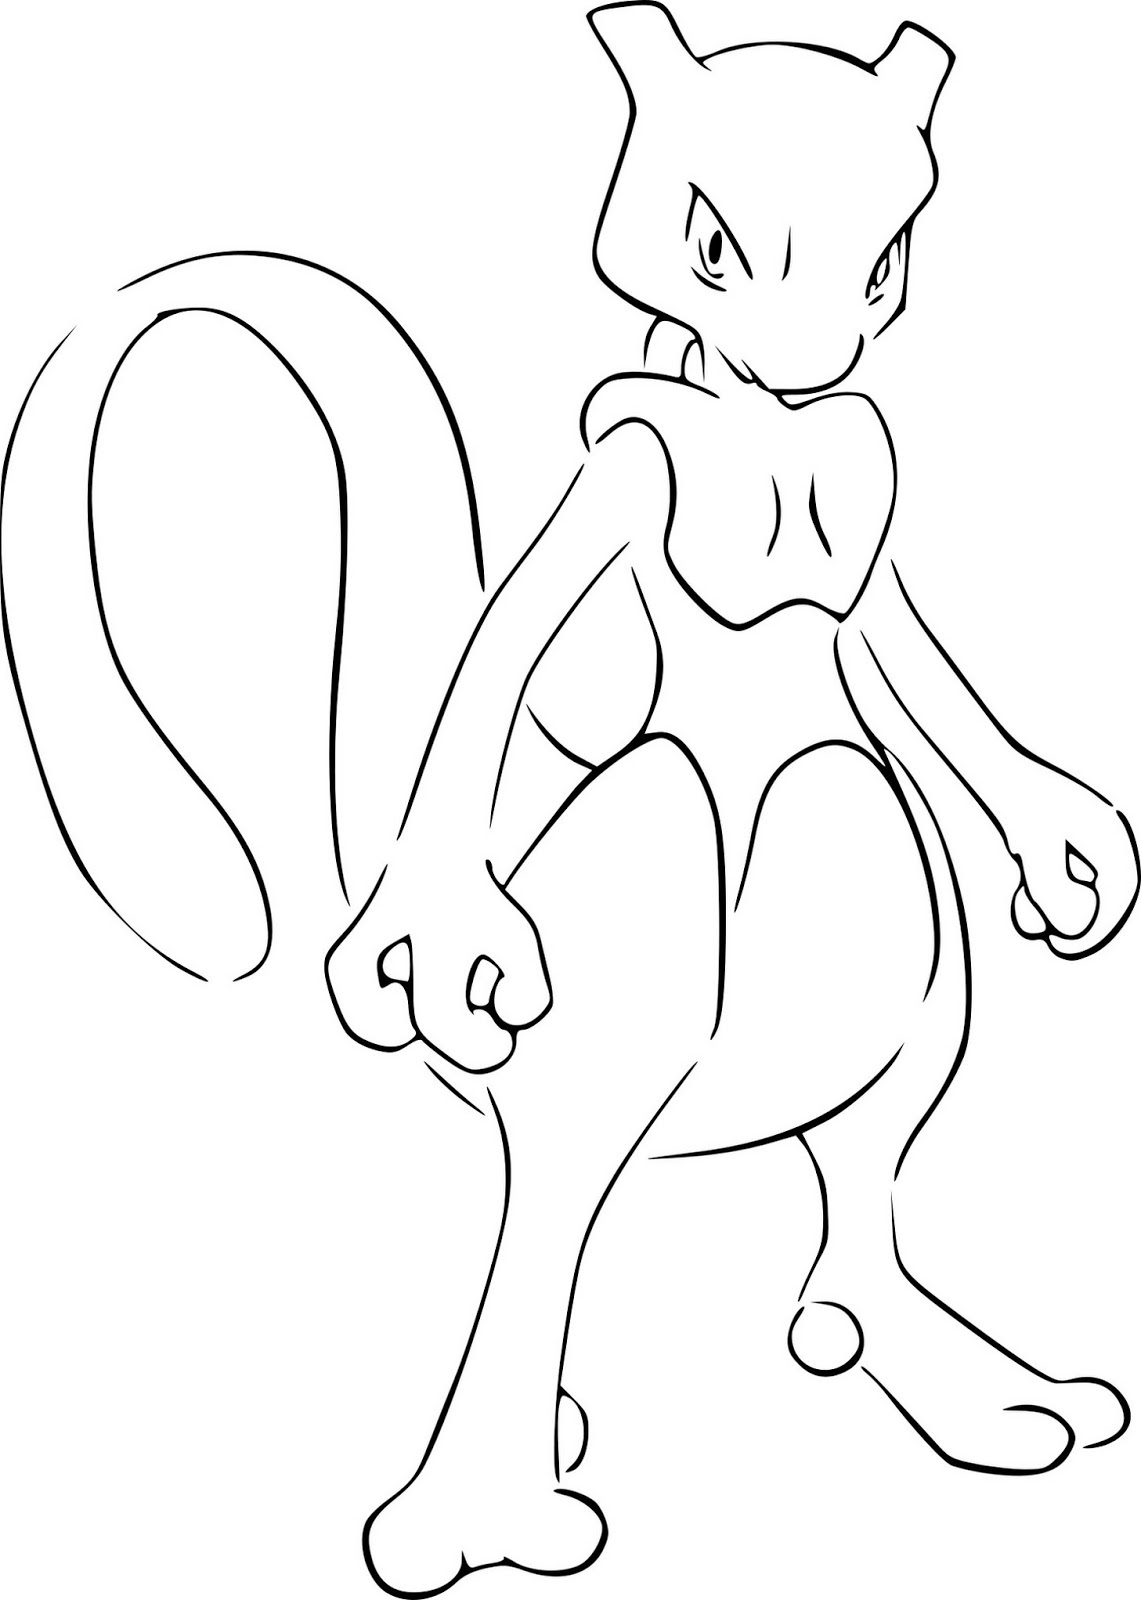 Mewtwo Coloring Pages Printable - Free Pokemon Coloring Pages